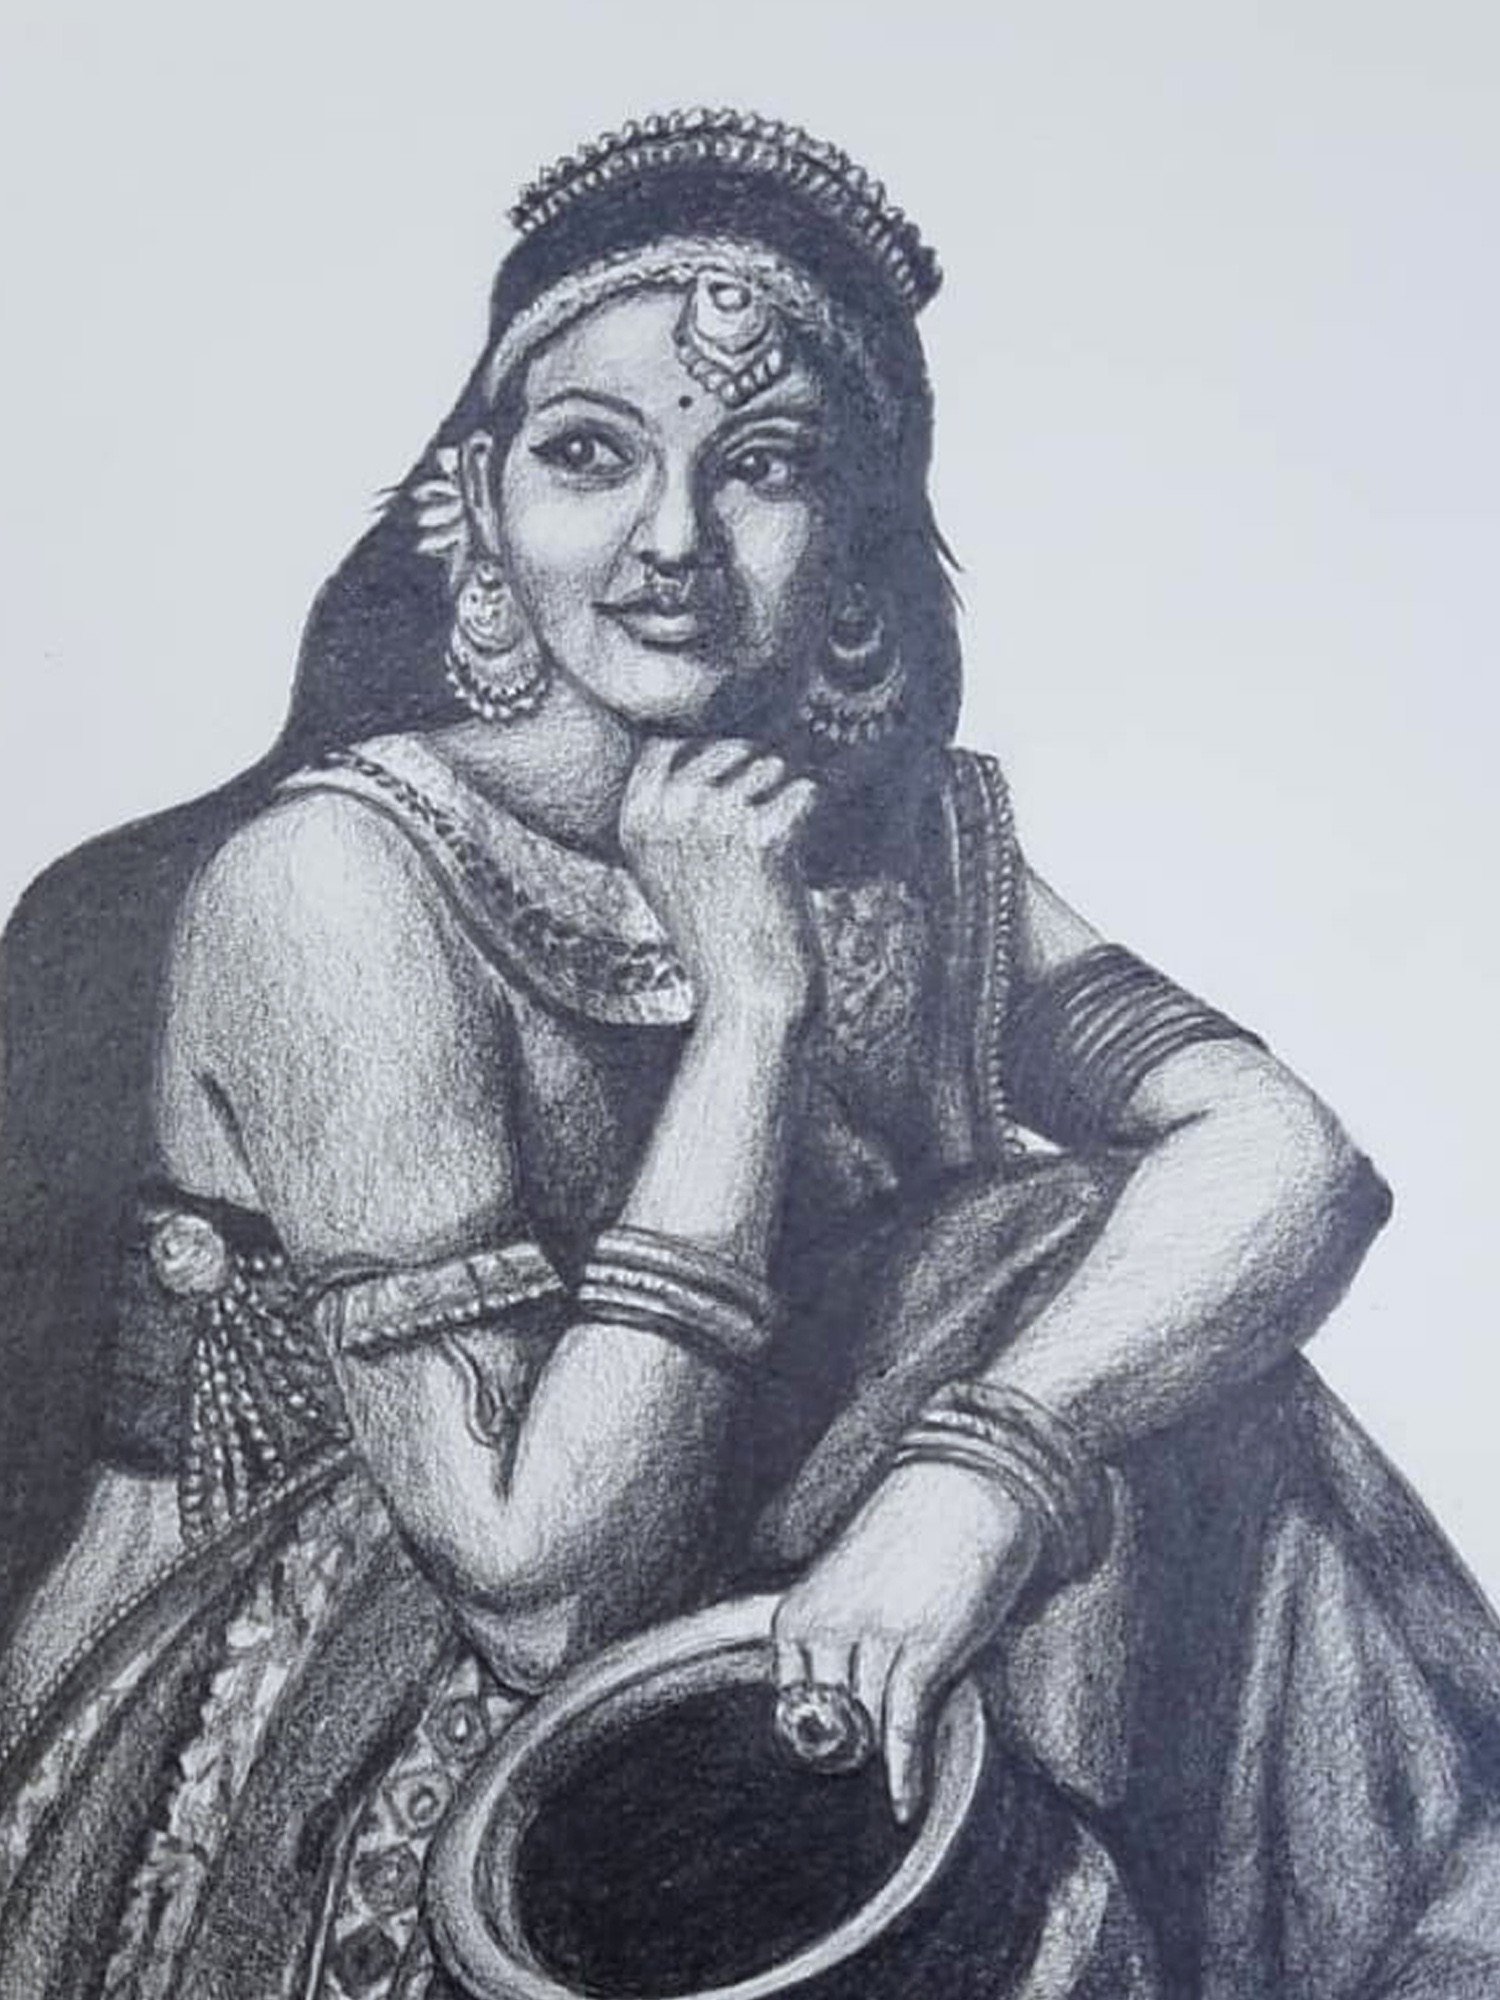 Drawing of an Indian Woman